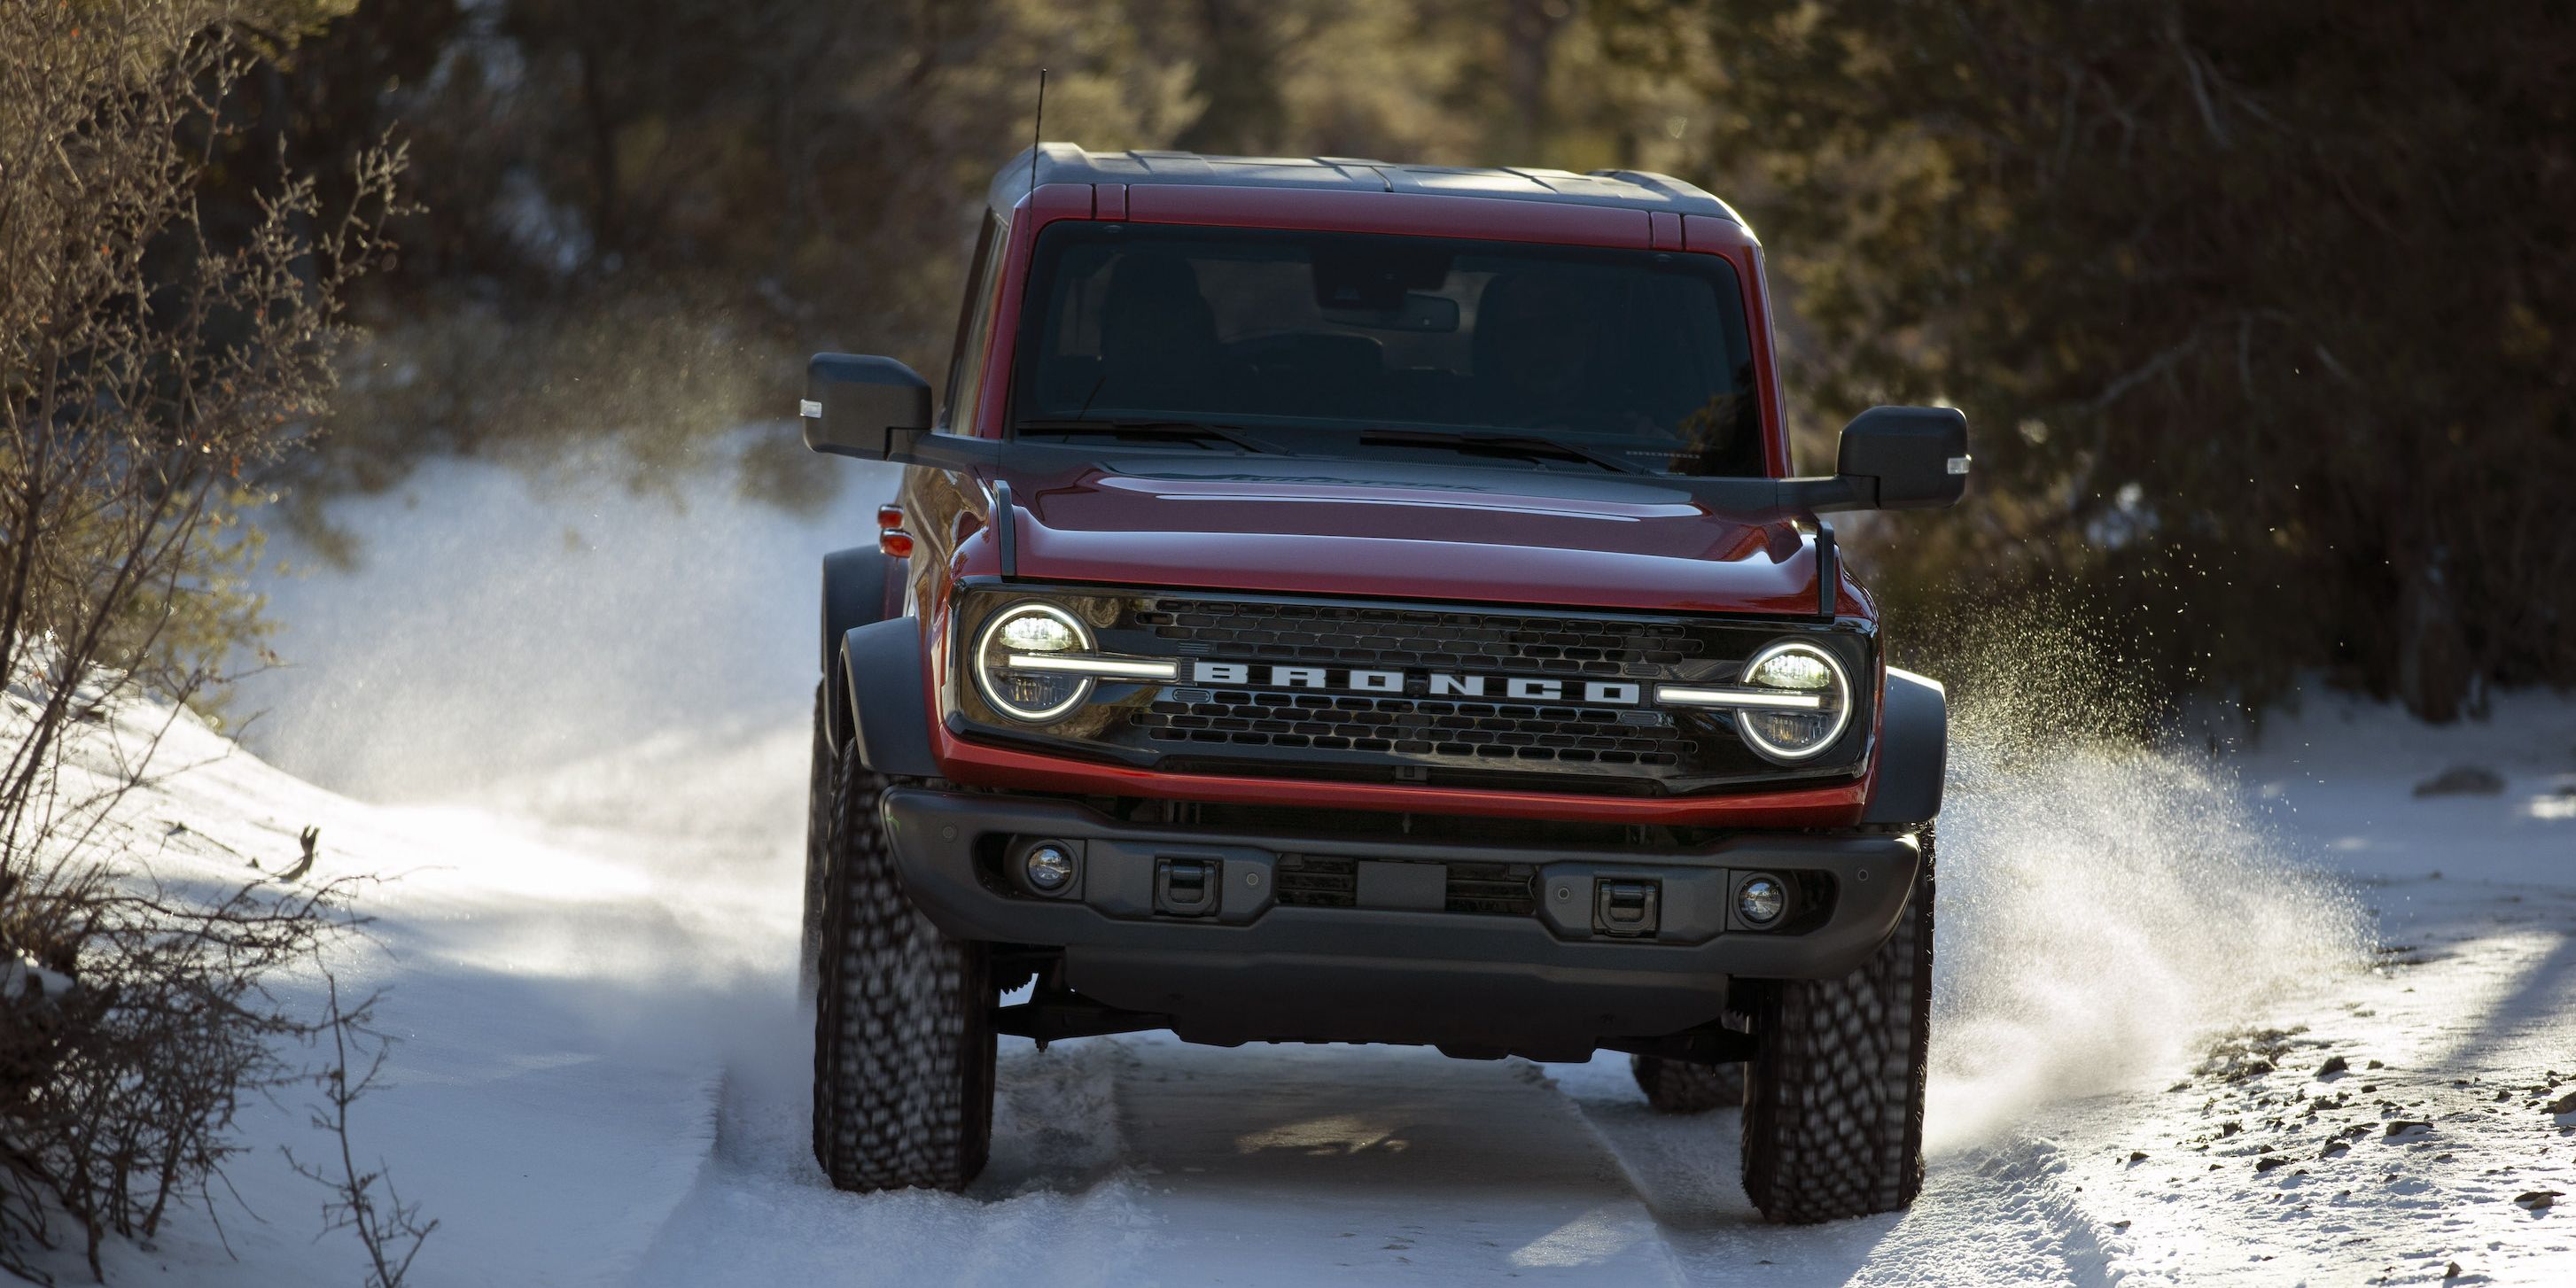 Ford Offers Bronco Buyers $2500 to Give Up Their Orders and Switch Models